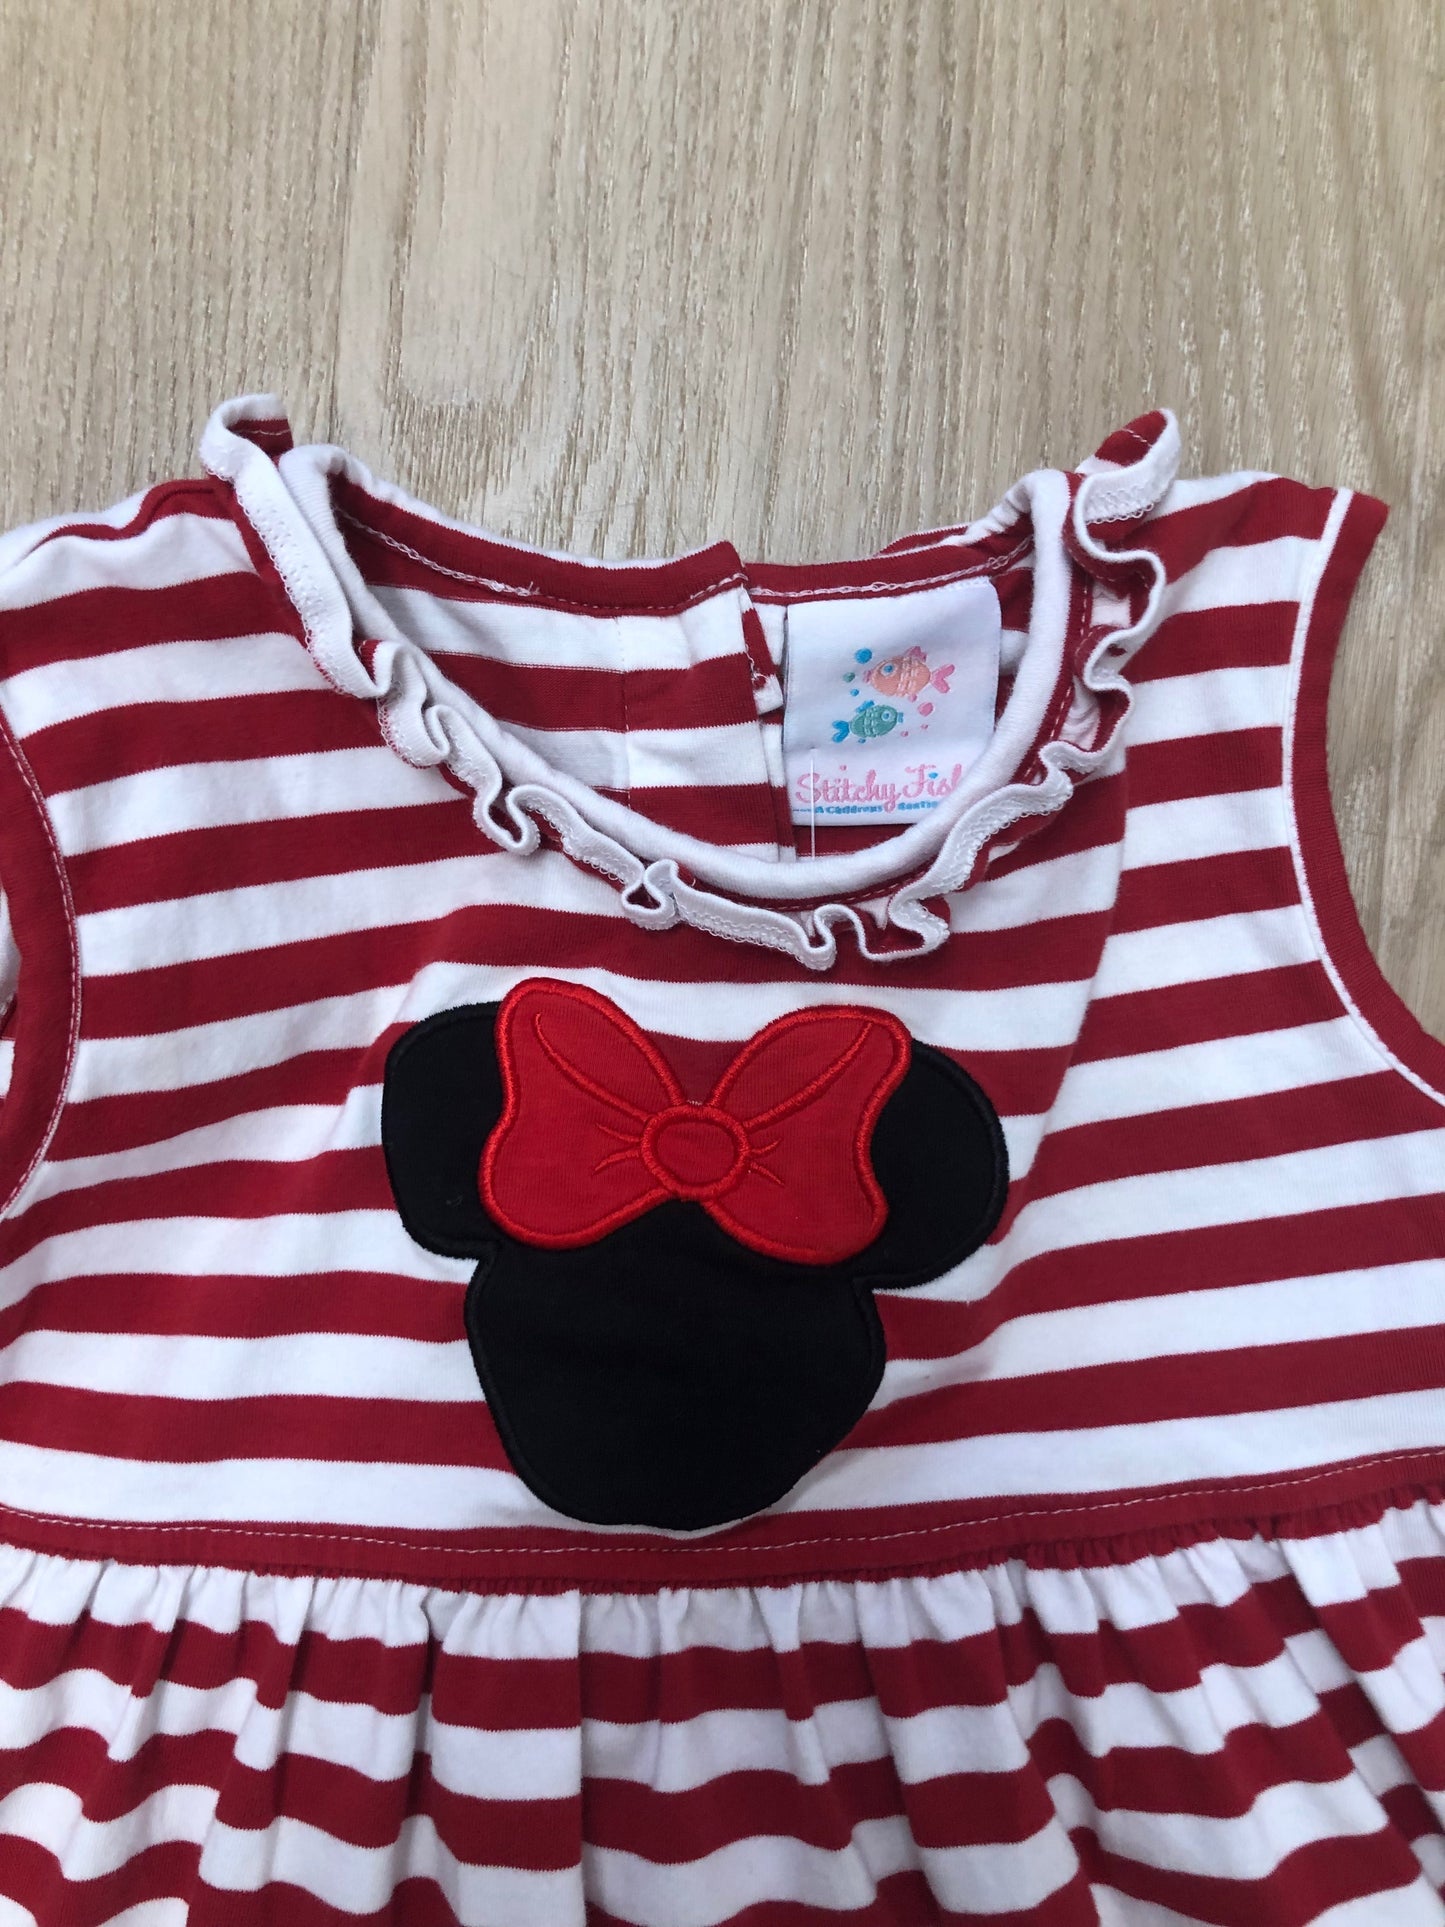 Stitchy Fish Child Size 2T Red Minnie Mouse Dress